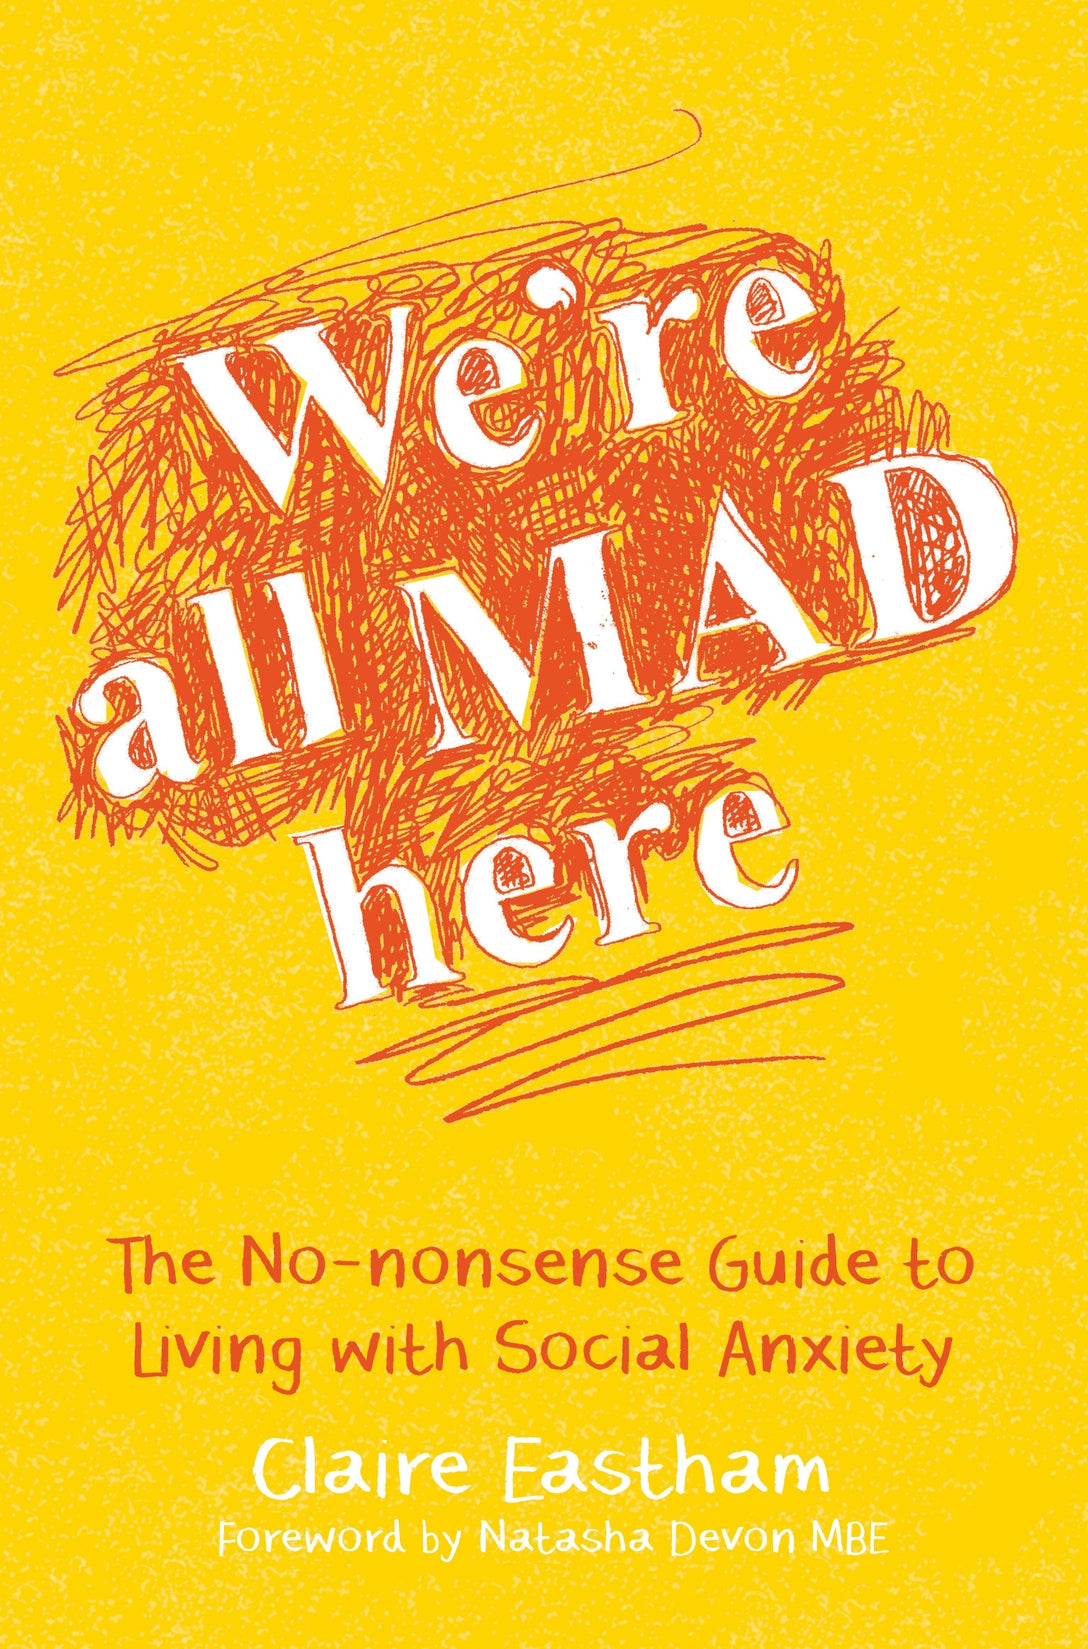 We're All Mad Here by Claire Eastham, Natasha Devon